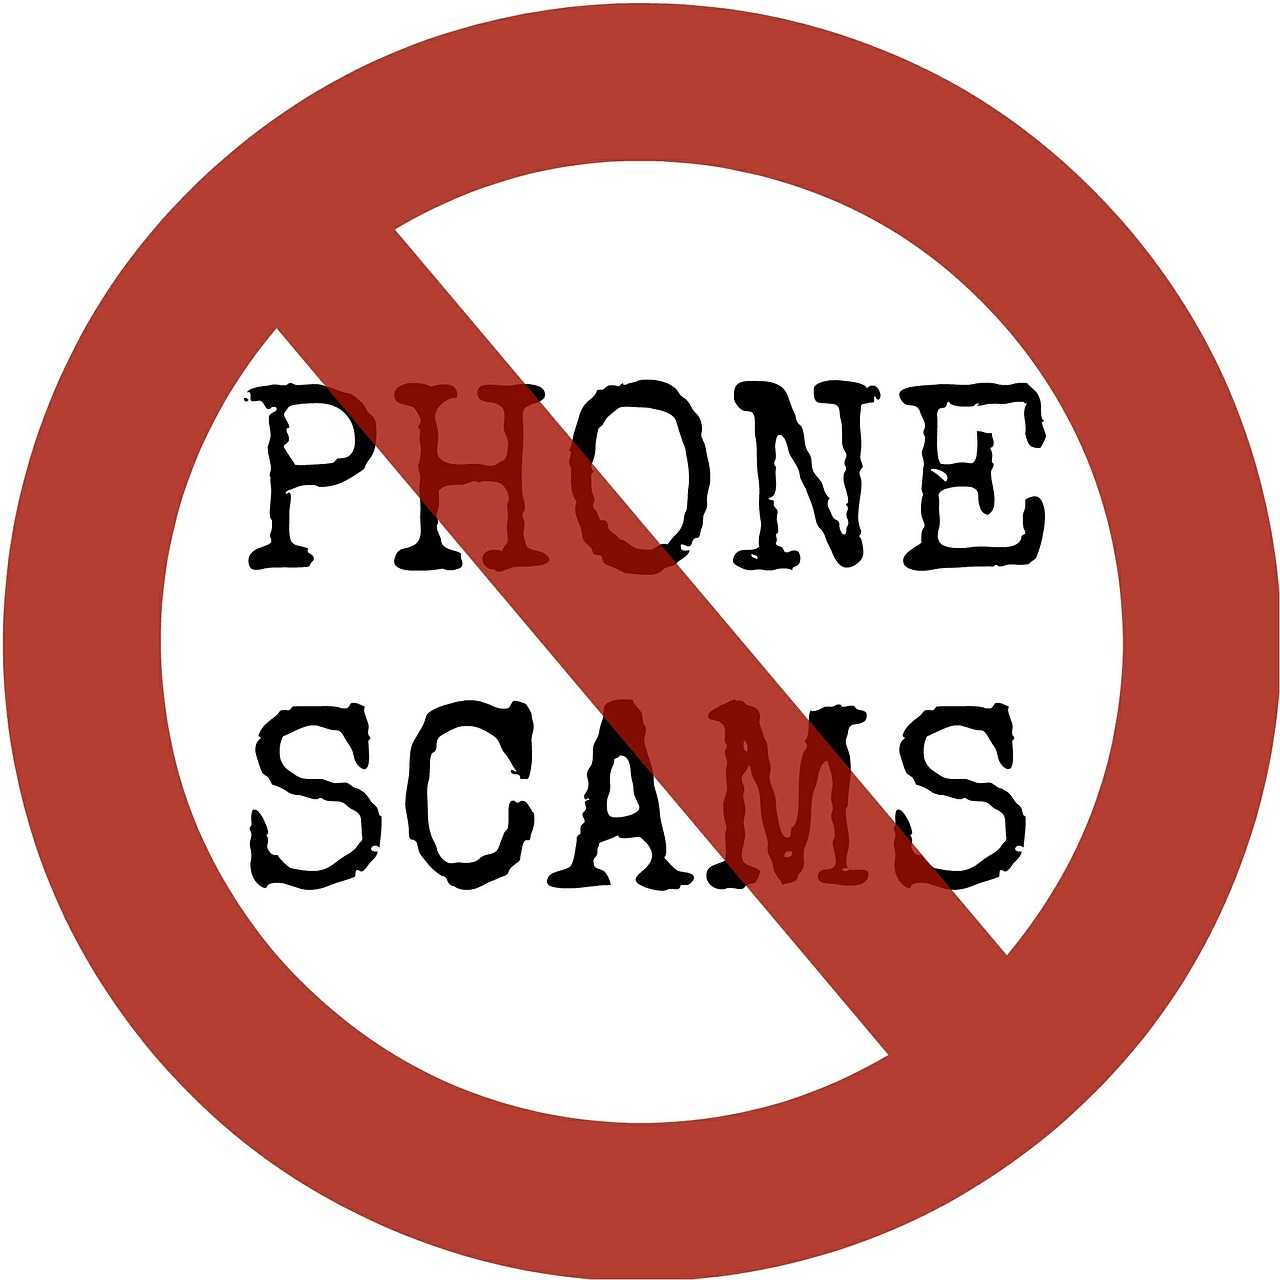 phone scams graphic